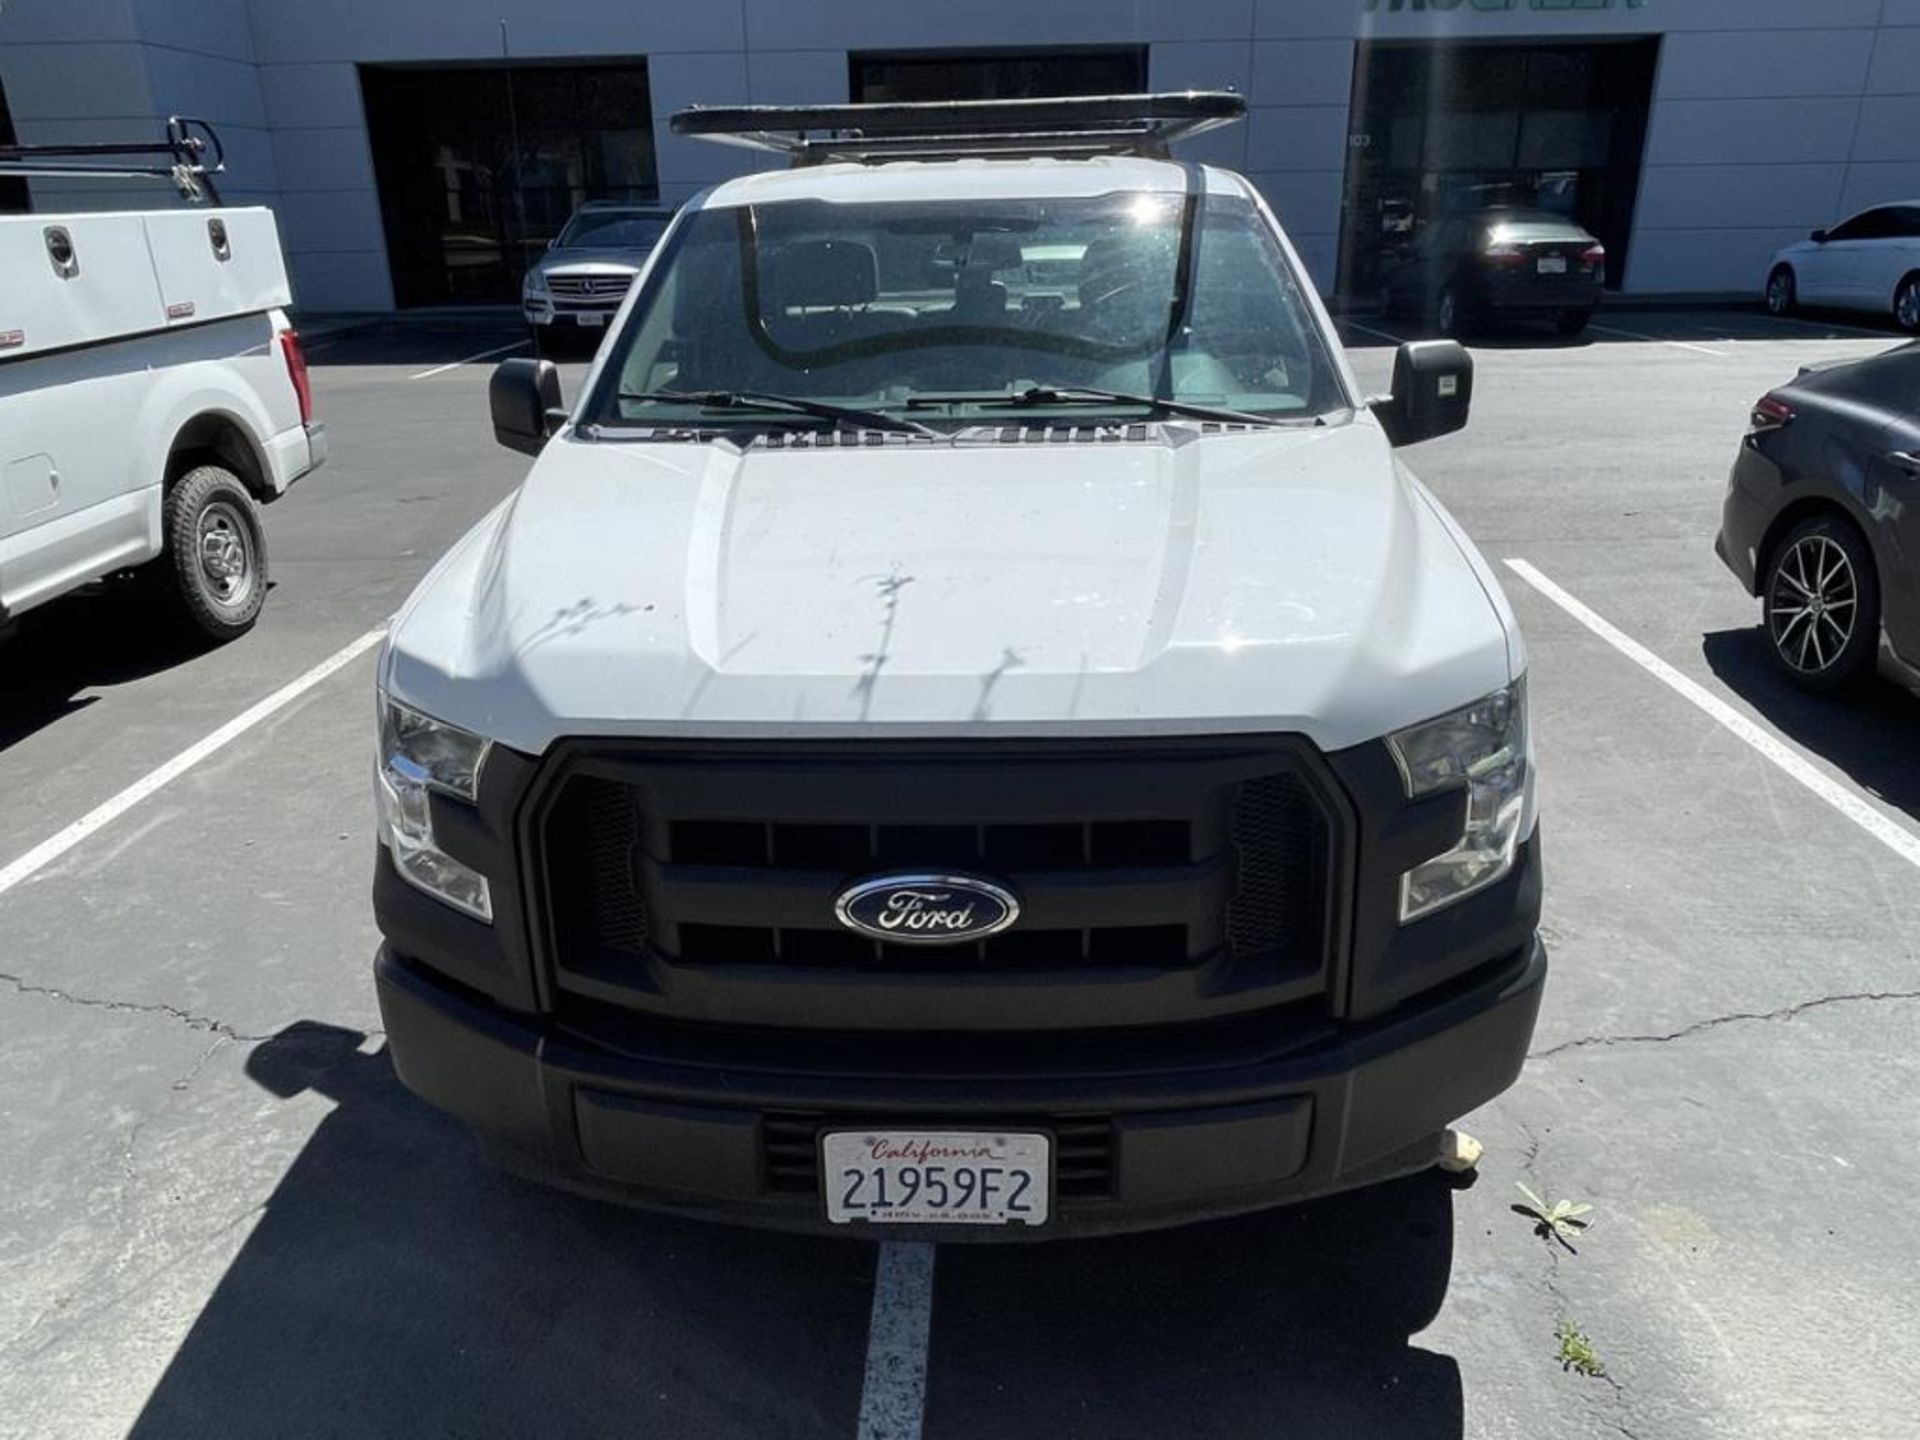 Ford F150 XL Truck - Image 8 of 27